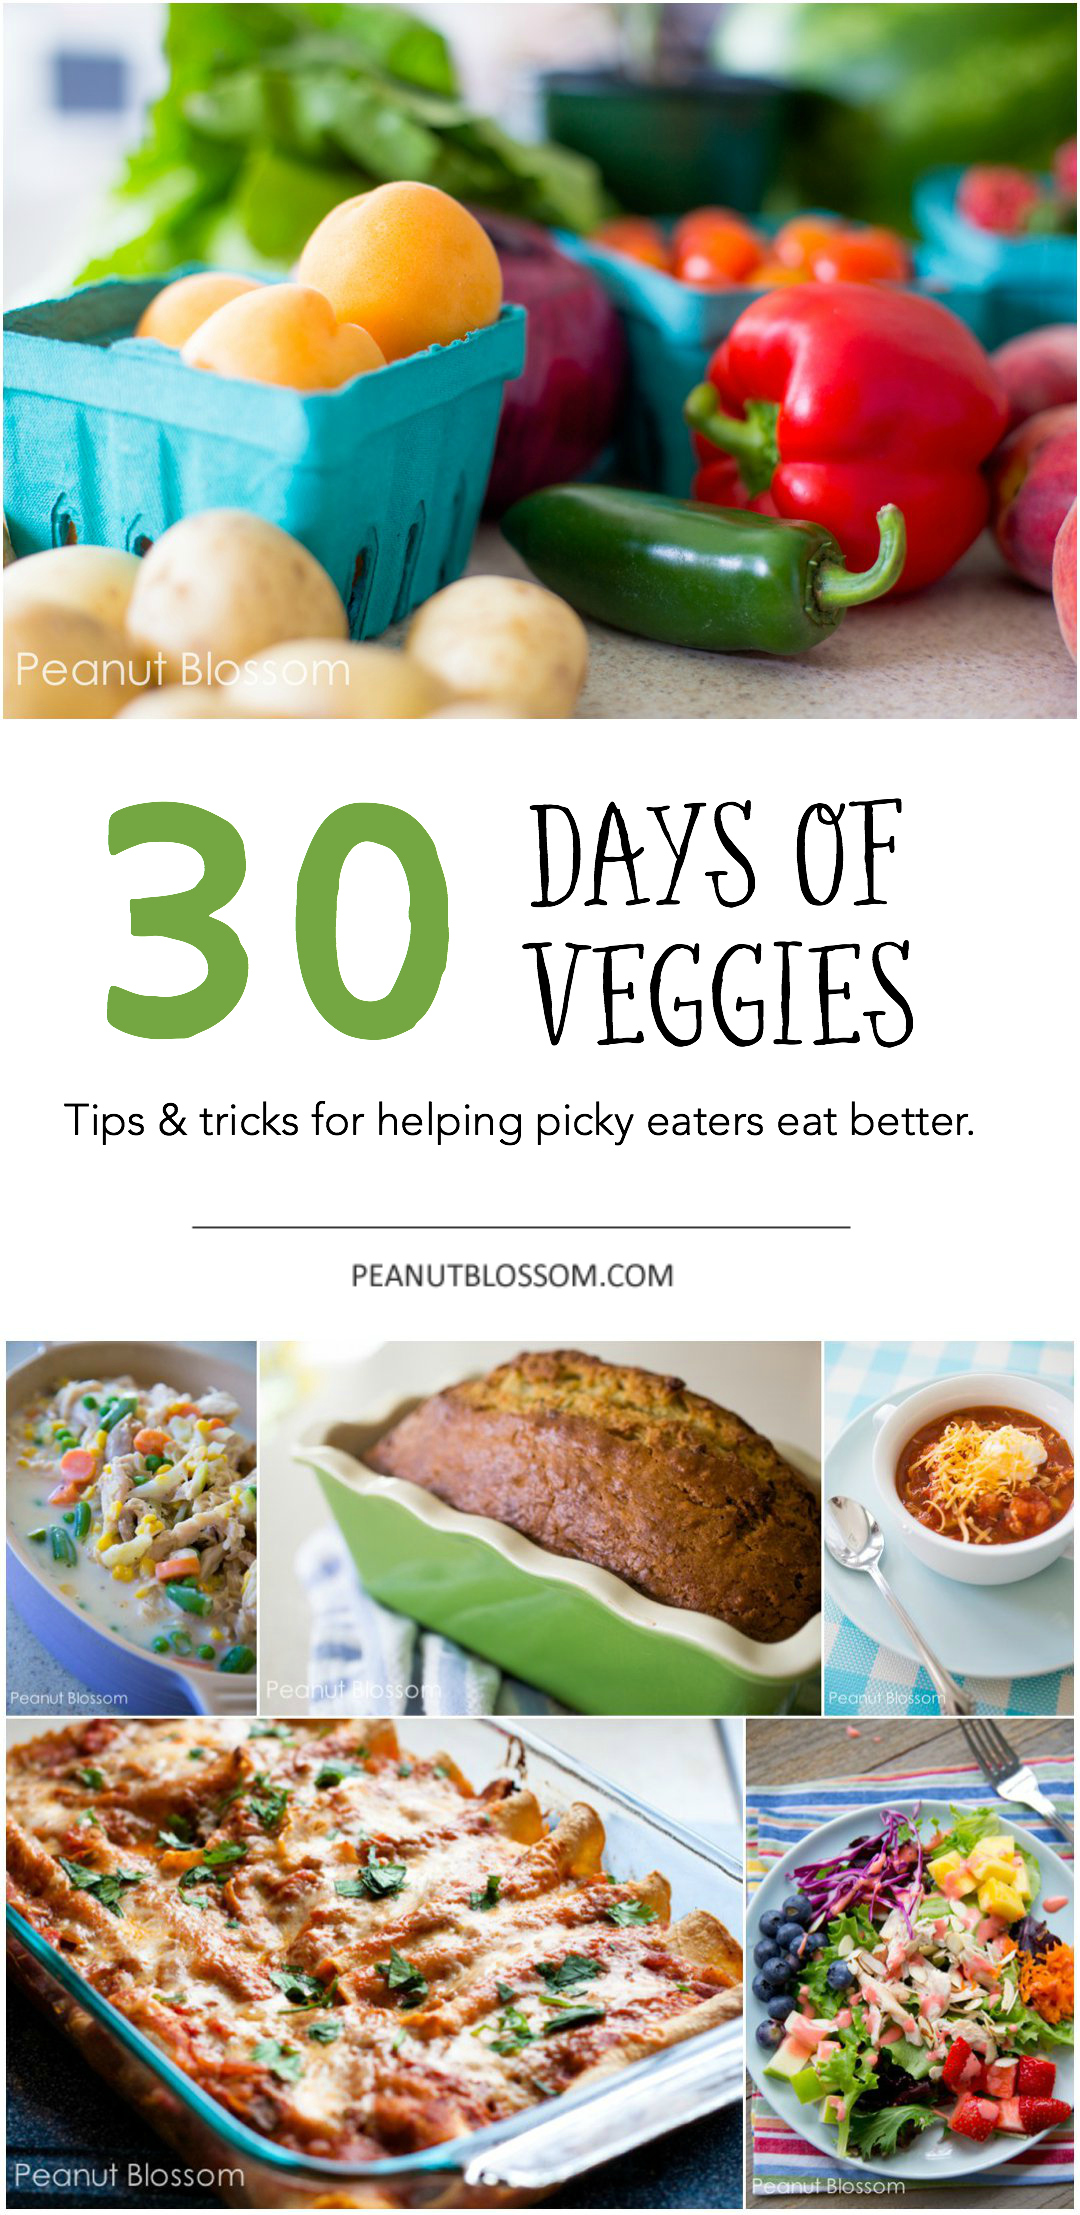 30 Days of Veggies: tips and tricks for helping picky eaters eat better